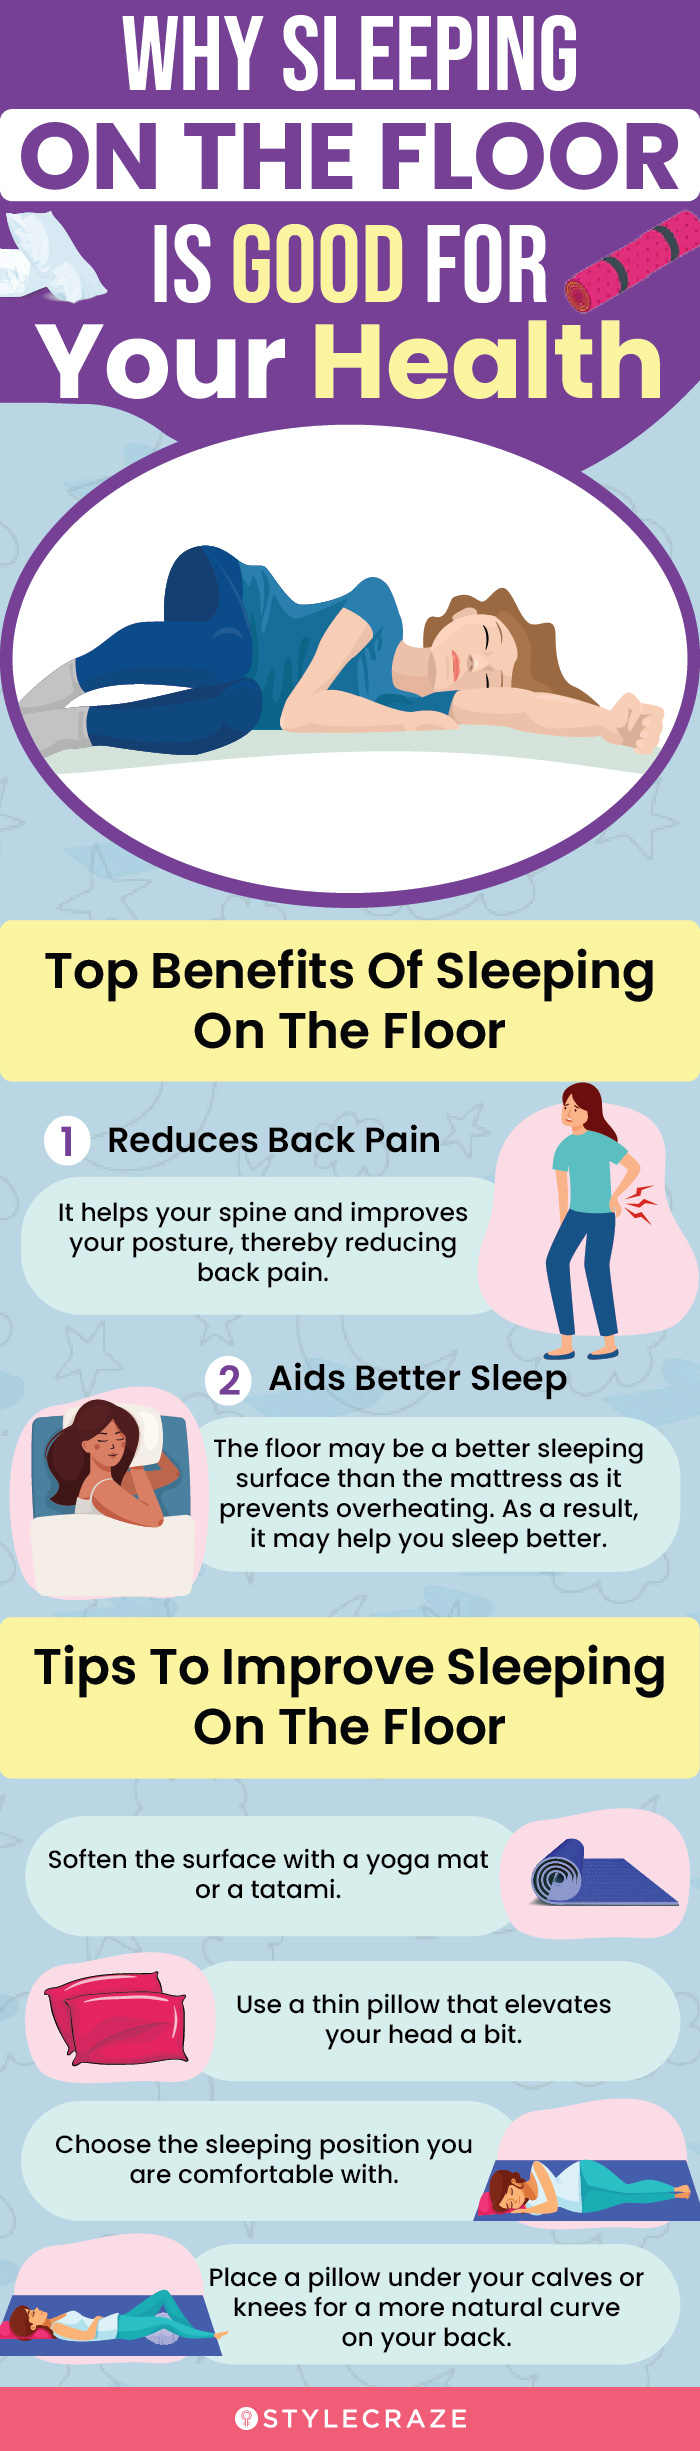 4 Unknown Health Benefits Of Sleeping On The Floor